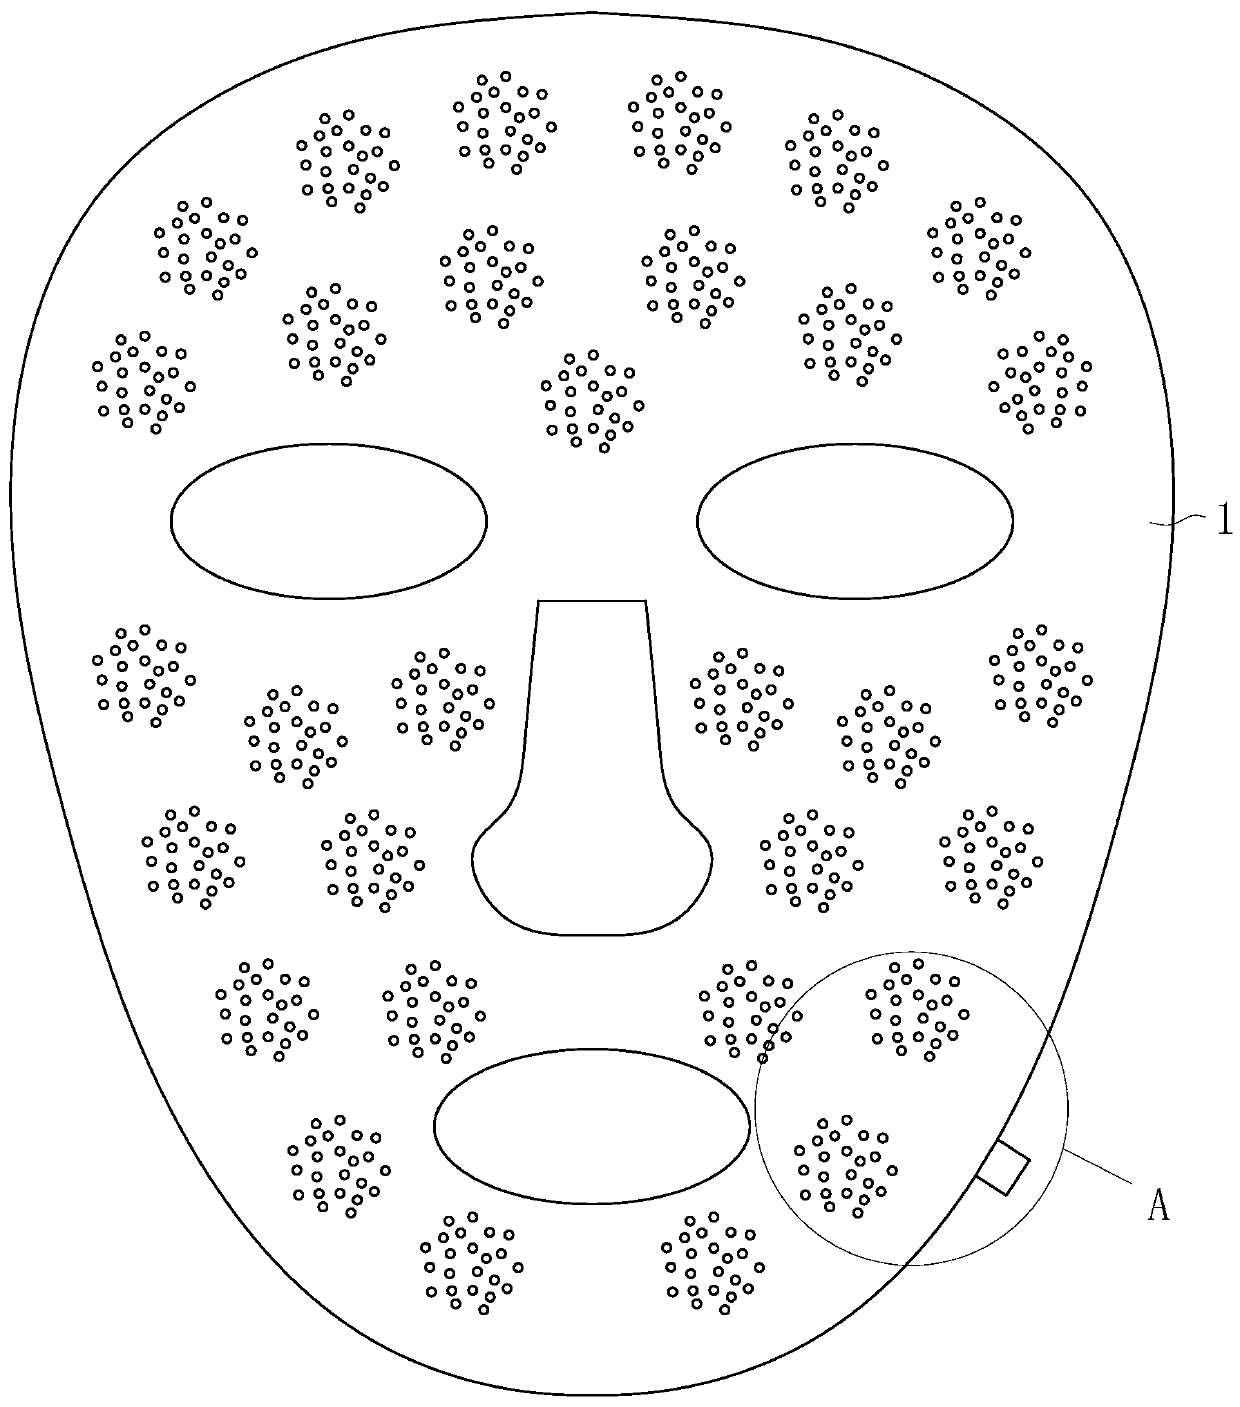 Inflammation-preventing and acne-removing facial mask containing natural ingredients